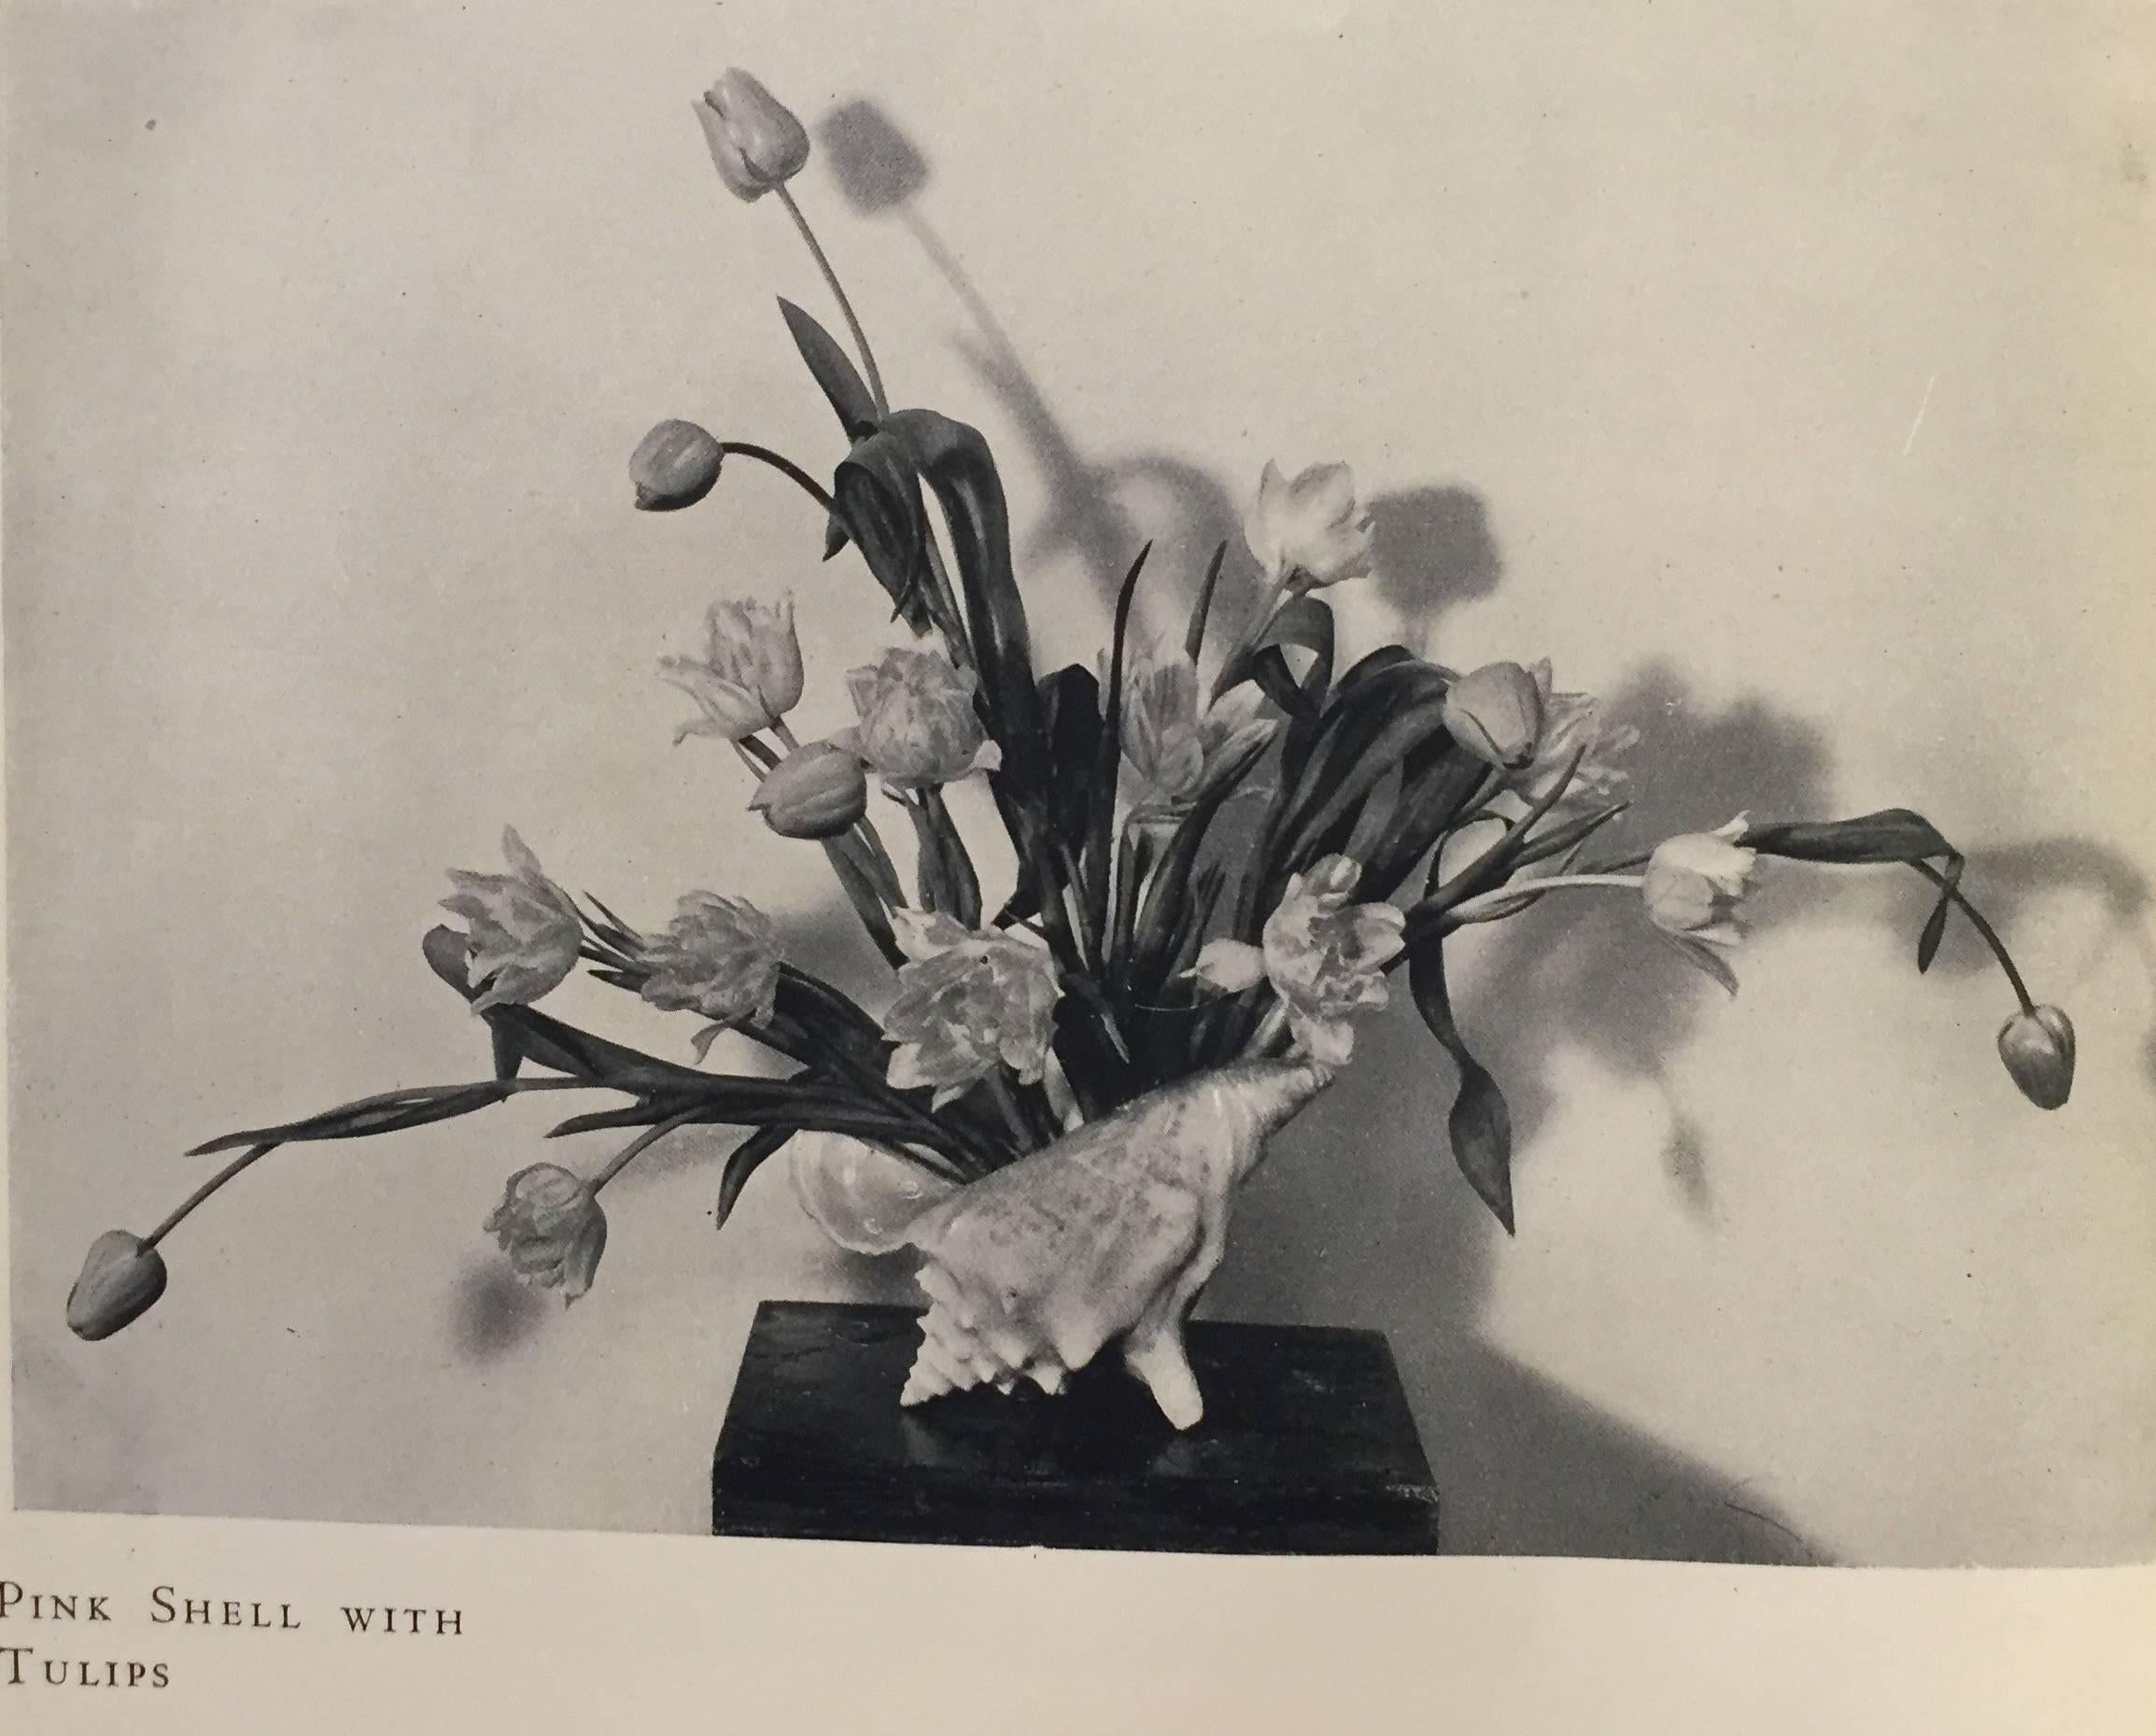 Published by J. M. Dent & Sons, 1953.

In this incredibly sought after book, Constance Spry, the renowned British florist, creates a guide for flower arranging. Separated into themes, uses, colors and occasions, Spry’s advice covers a broad range